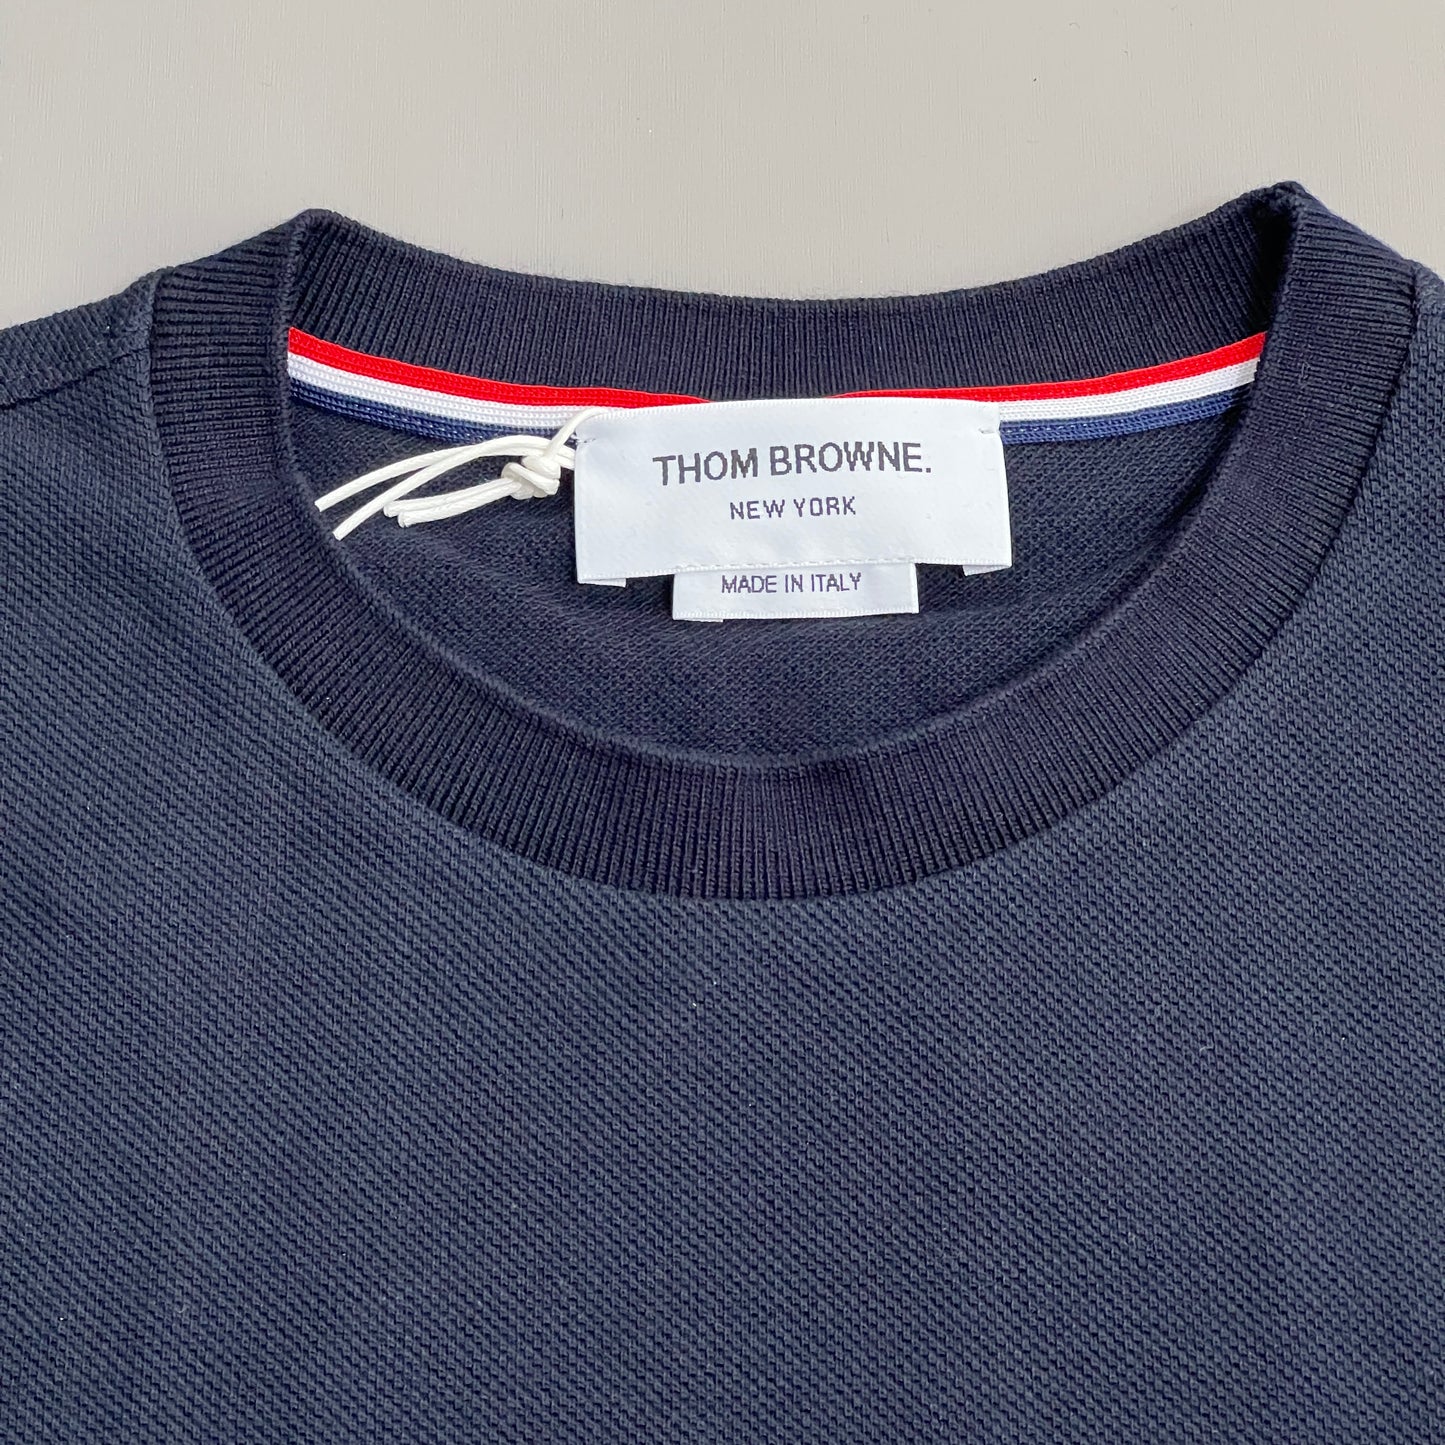 THOM BROWNE Short Sleeve Tee w/engineered 4Bar Stripe in Classic Pique Navy Size 2 (New)